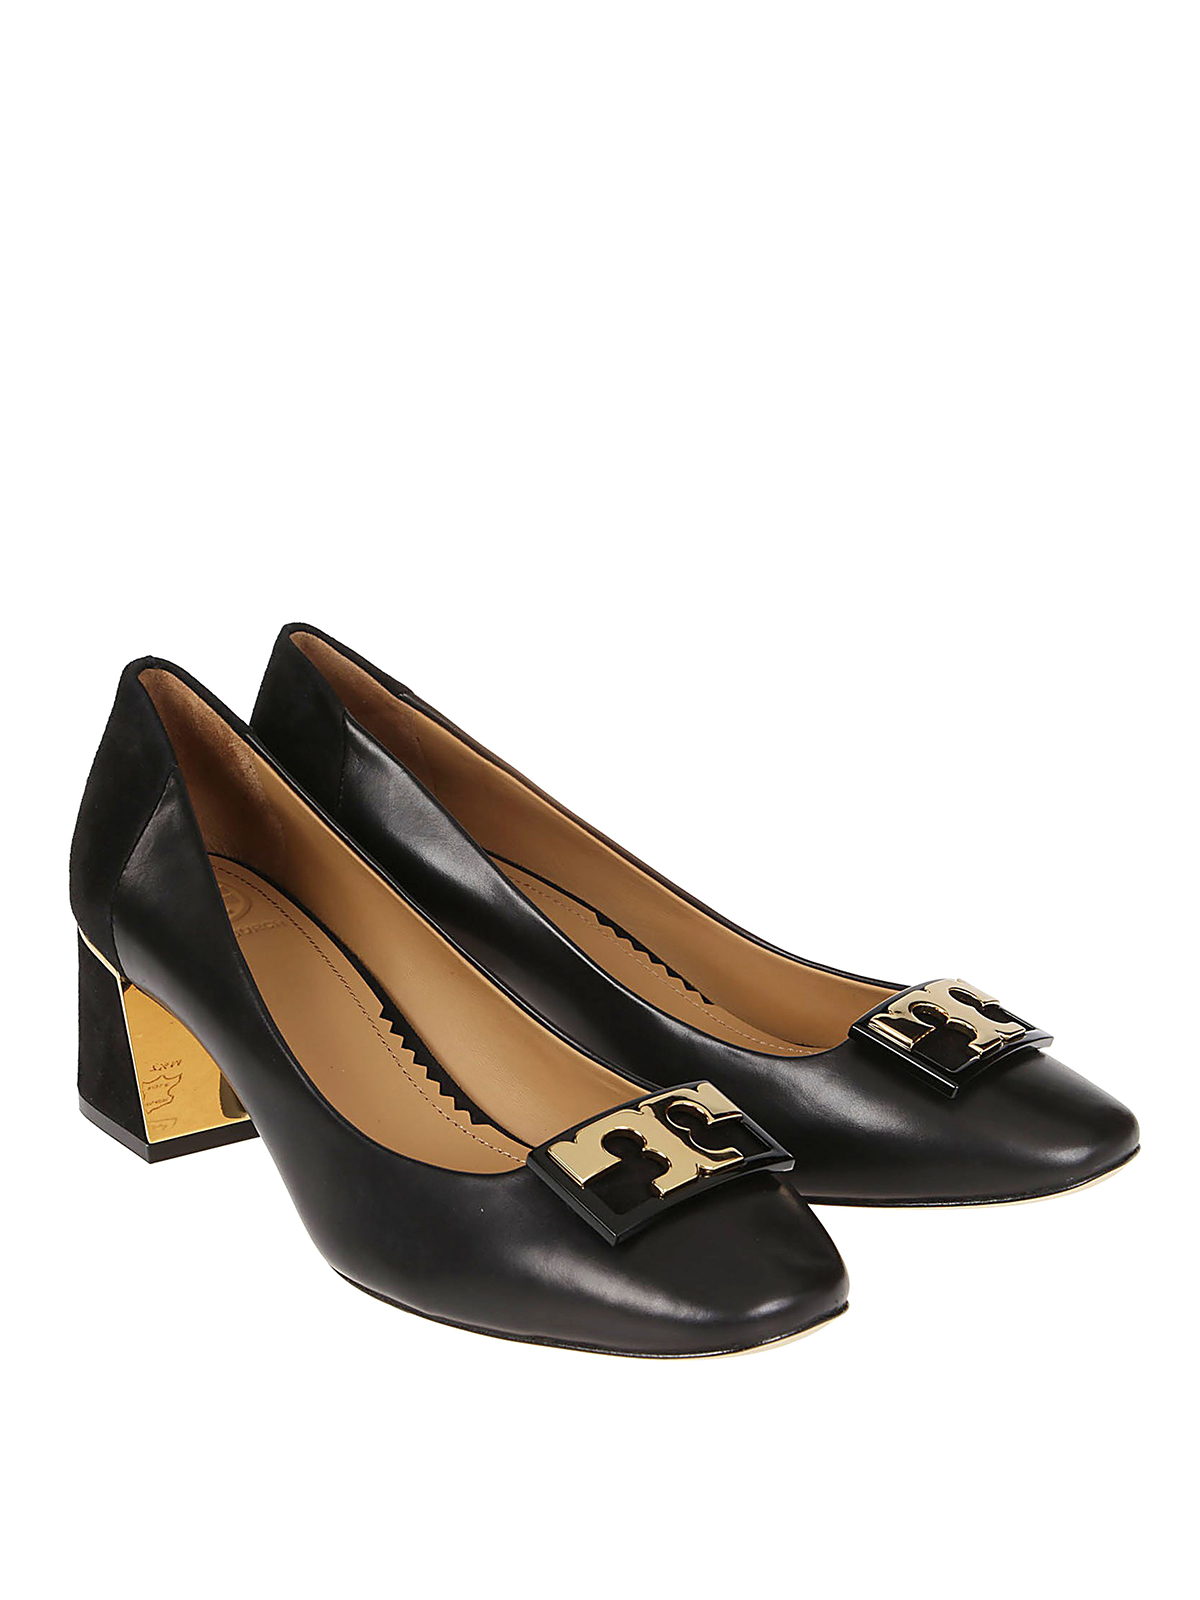 Court shoes Tory Burch - Gigi leather and suede pumps - 58269004